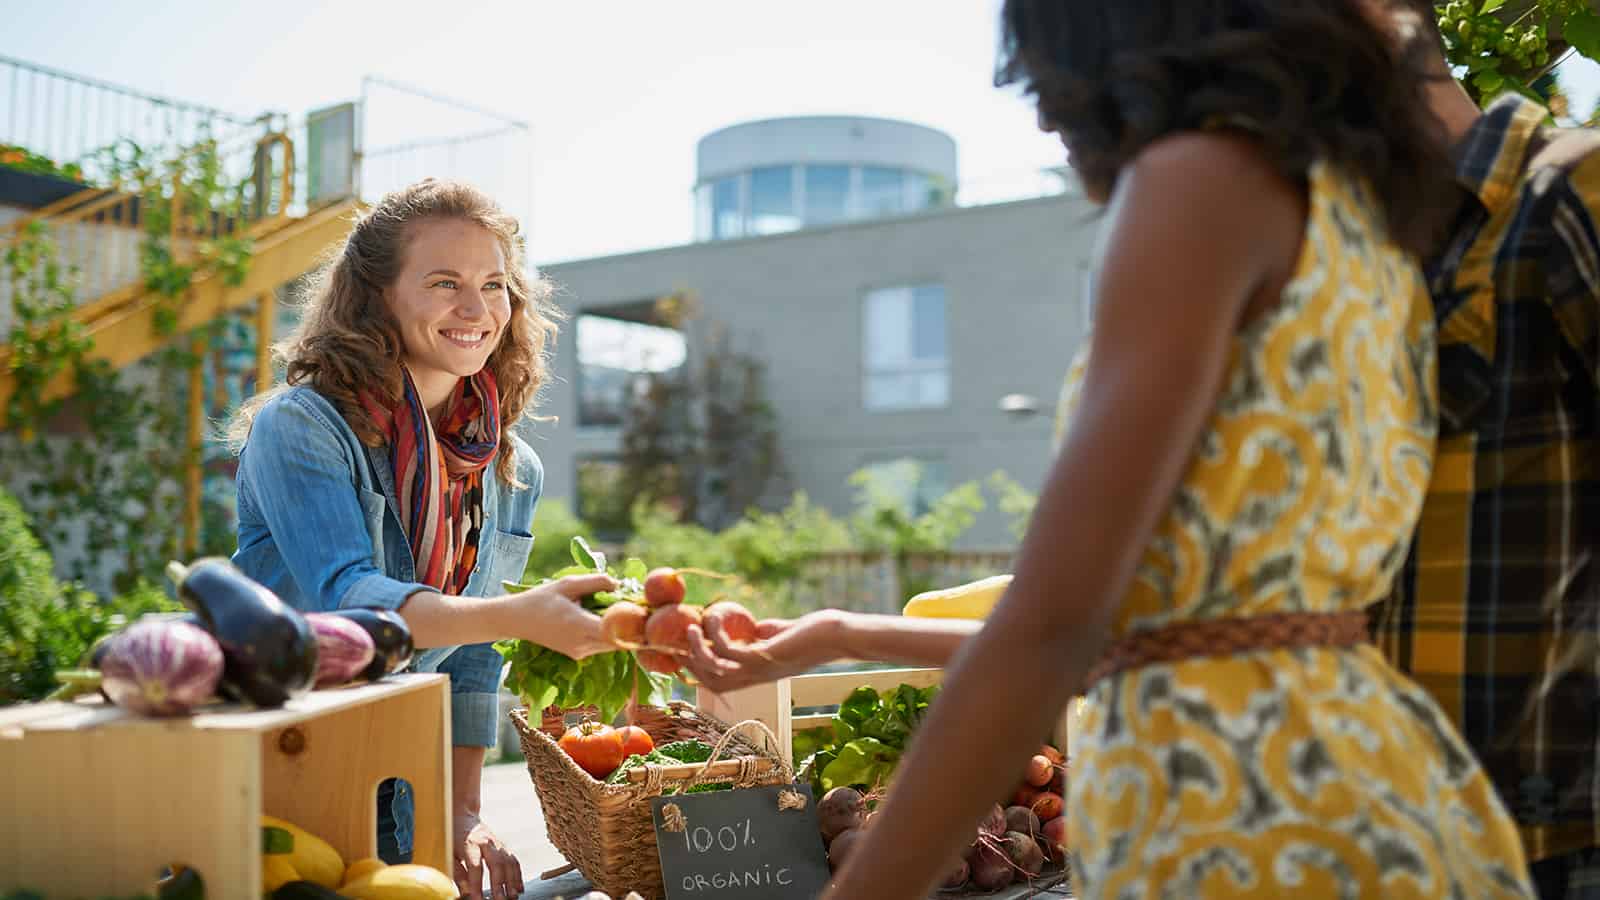 12 Reasons Why Buying Local Food Is Better for the World